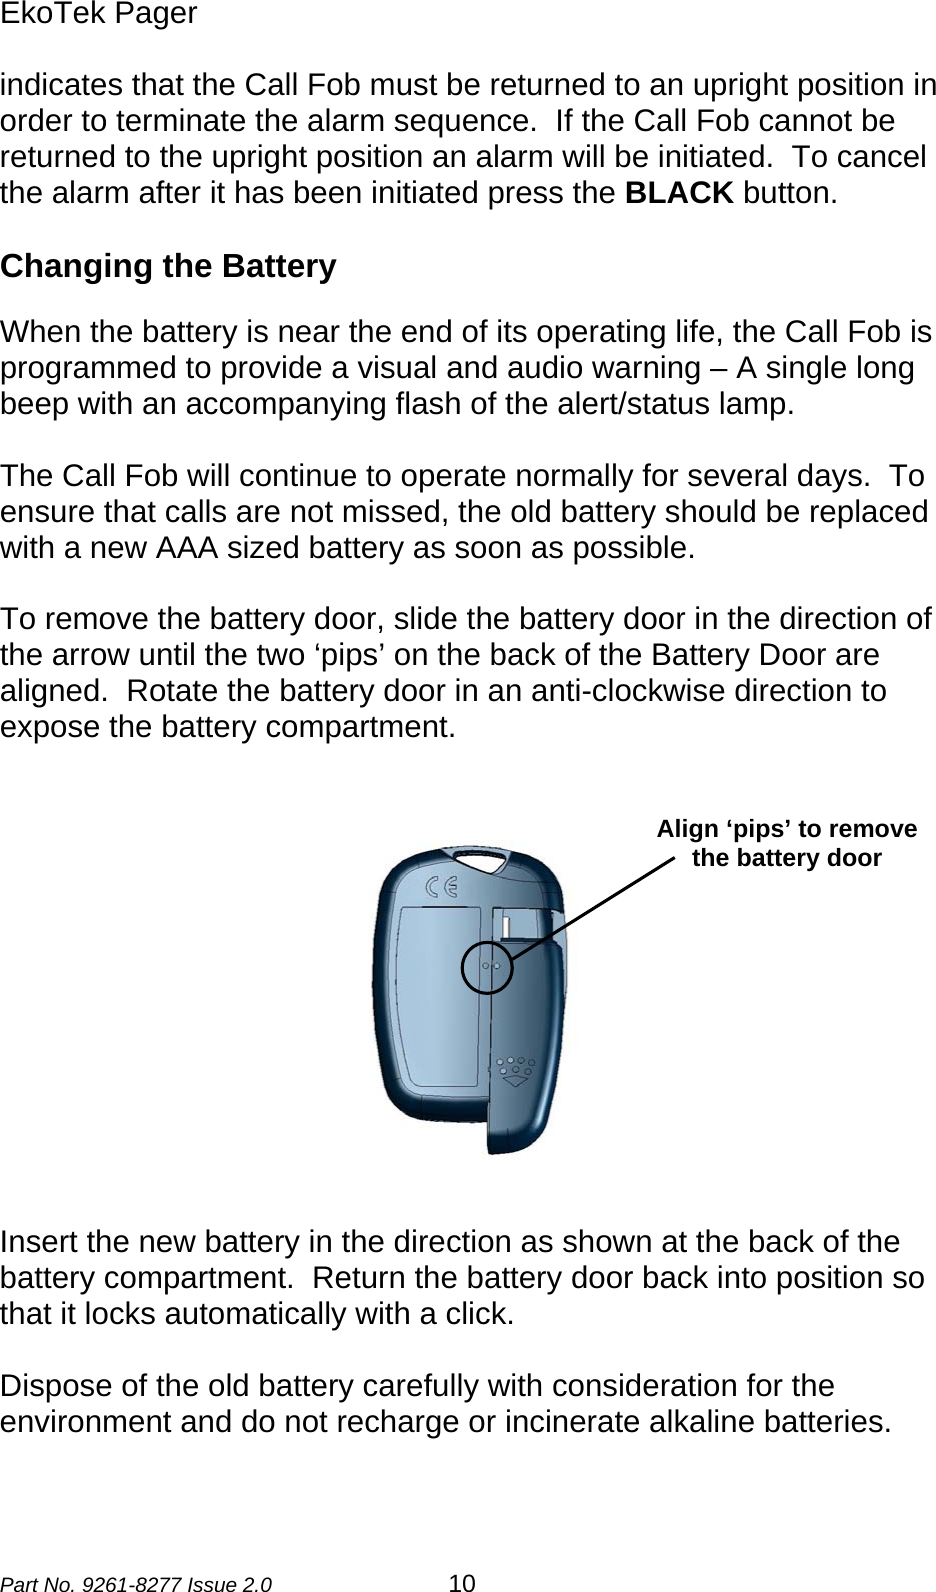 EkoTek Pager  indicates that the Call Fob must be returned to an upright position in order to terminate the alarm sequence.  If the Call Fob cannot be returned to the upright position an alarm will be initiated.  To cancel the alarm after it has been initiated press the BLACK button.  Changing the Battery  When the battery is near the end of its operating life, the Call Fob is programmed to provide a visual and audio warning – A single long beep with an accompanying flash of the alert/status lamp.    The Call Fob will continue to operate normally for several days.  To ensure that calls are not missed, the old battery should be replaced with a new AAA sized battery as soon as possible.  To remove the battery door, slide the battery door in the direction of the arrow until the two ‘pips’ on the back of the Battery Door are aligned.  Rotate the battery door in an anti-clockwise direction to expose the battery compartment.    Align ‘pips’ to remove the battery door  Insert the new battery in the direction as shown at the back of the battery compartment.  Return the battery door back into position so that it locks automatically with a click.  Dispose of the old battery carefully with consideration for the environment and do not recharge or incinerate alkaline batteries.   Part No. 9261-8277 Issue 2.0 10 